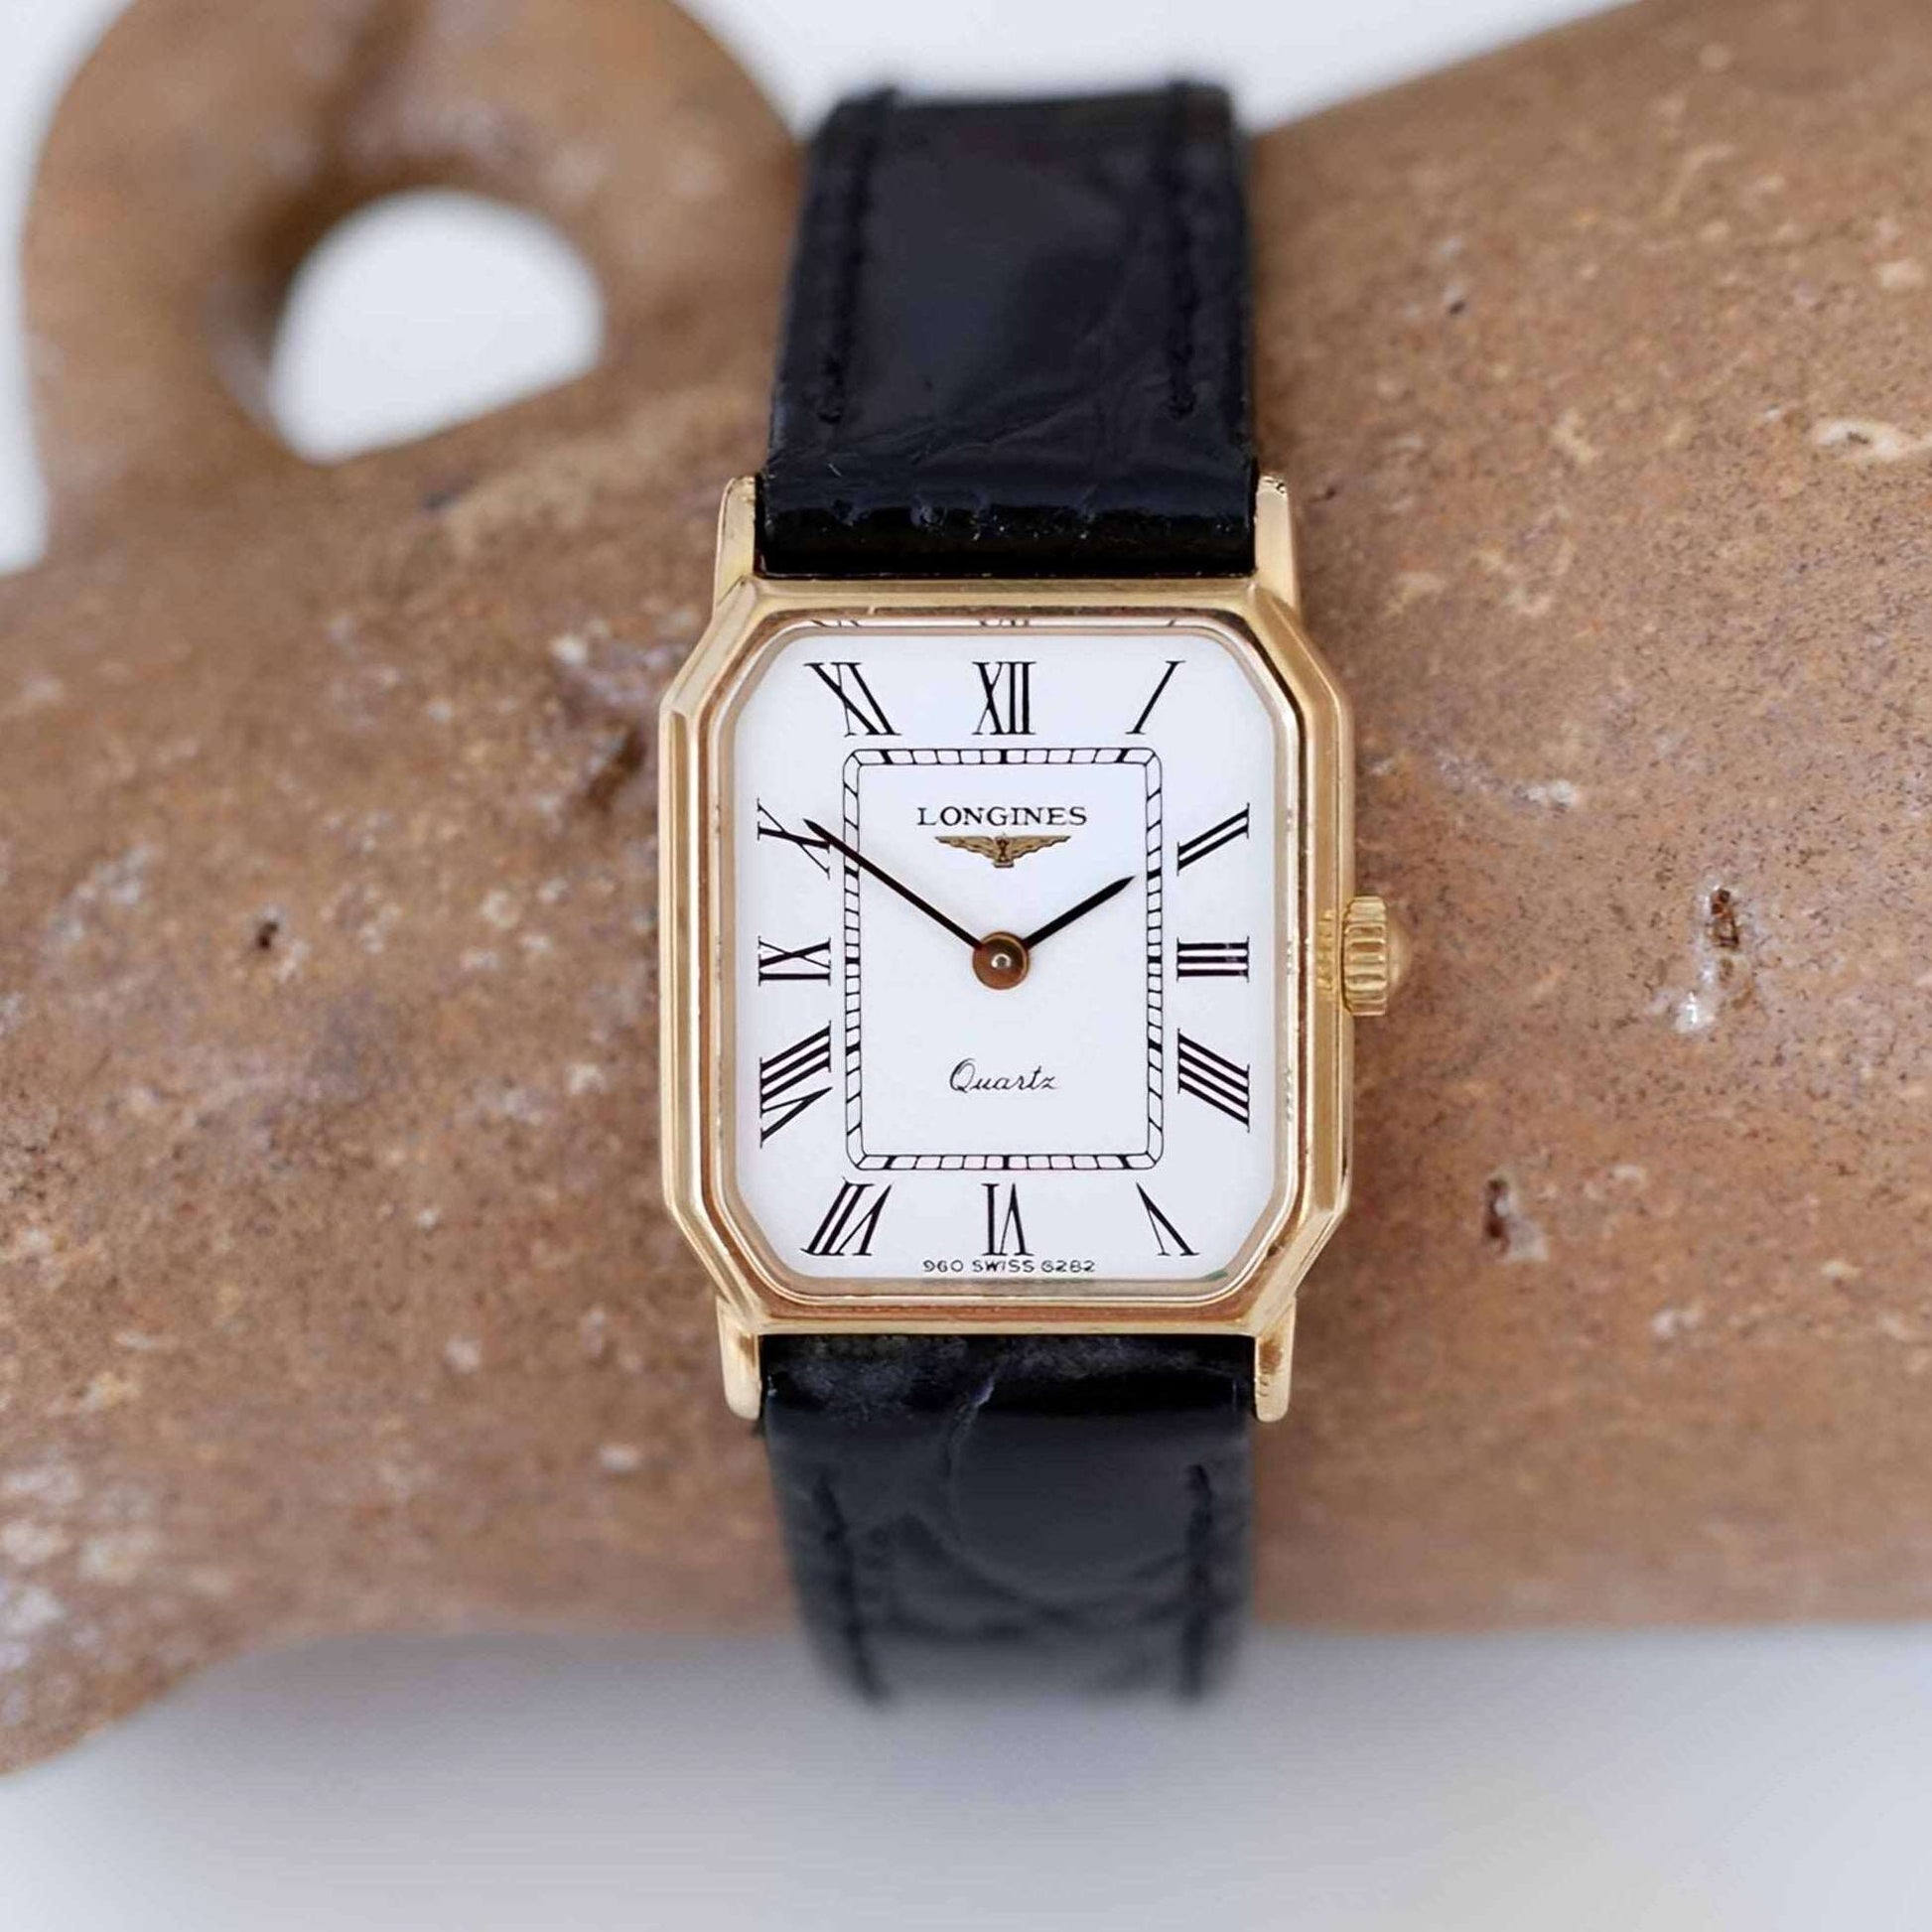 Longines Vintage Ladies Watch: 90s Golden, Rectangular with Roman Numerals | Second Front Side